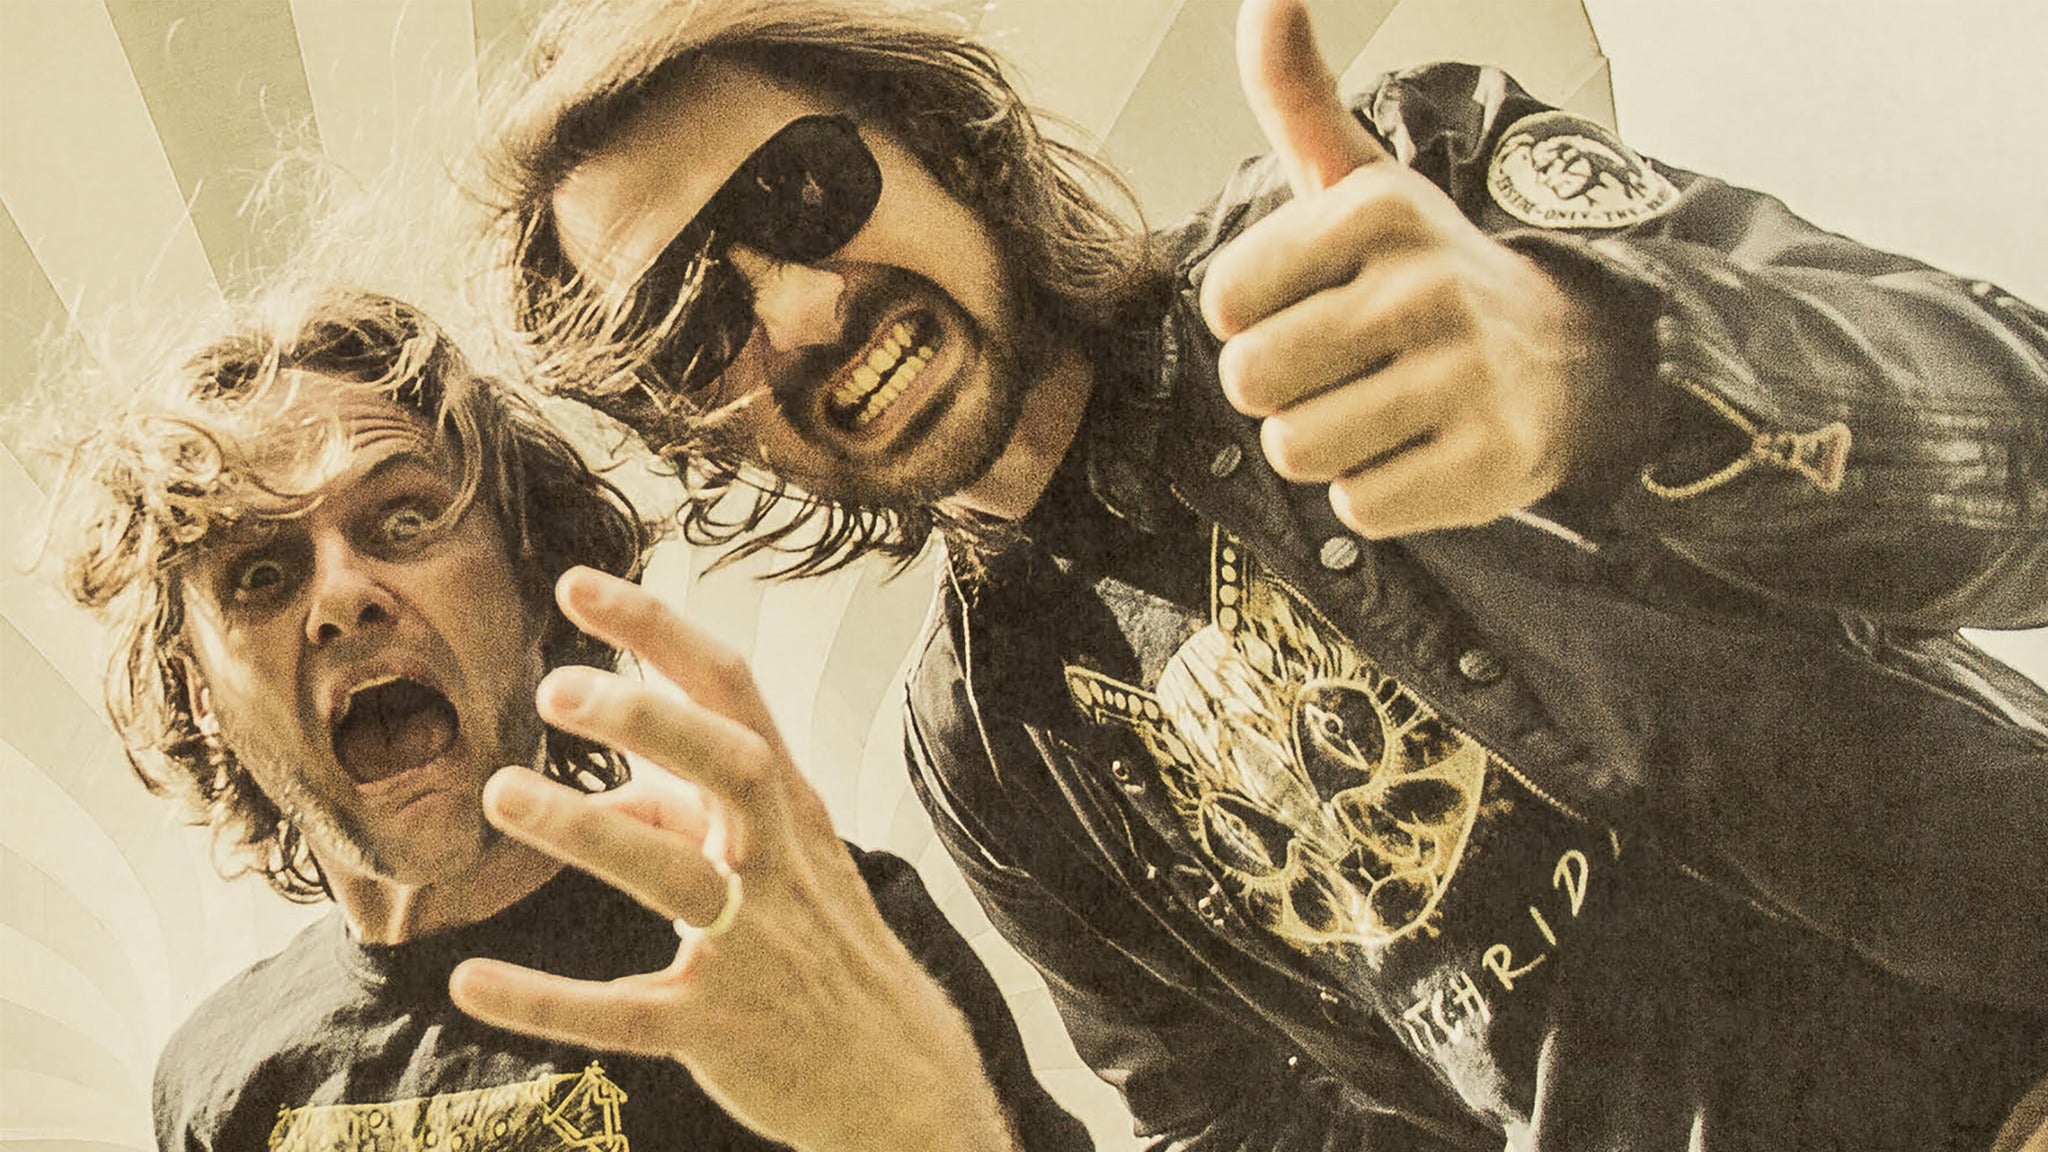 Truckfighters: Performing 'gravity X' In Full Event Title Pic